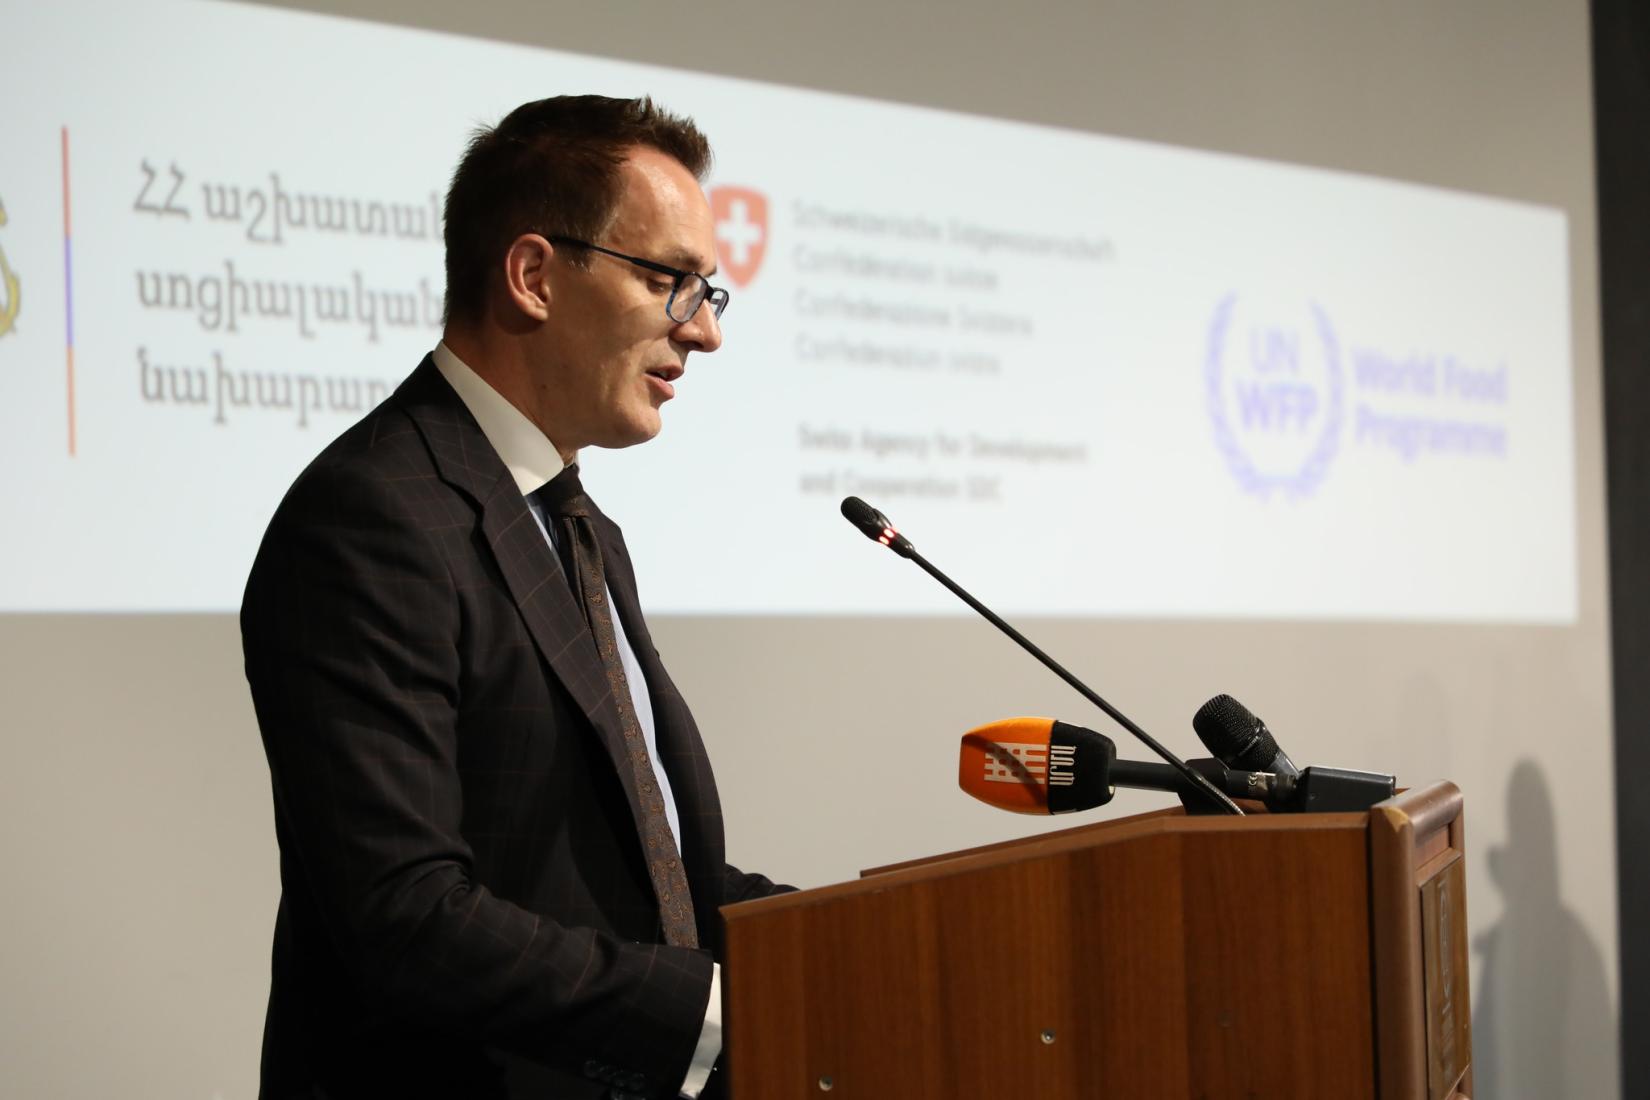 the Ambassador of Switzerland to Armenia, H.E. Lukas Rosenkranz, during the official project signing ceremony between the SDC and the WFP.